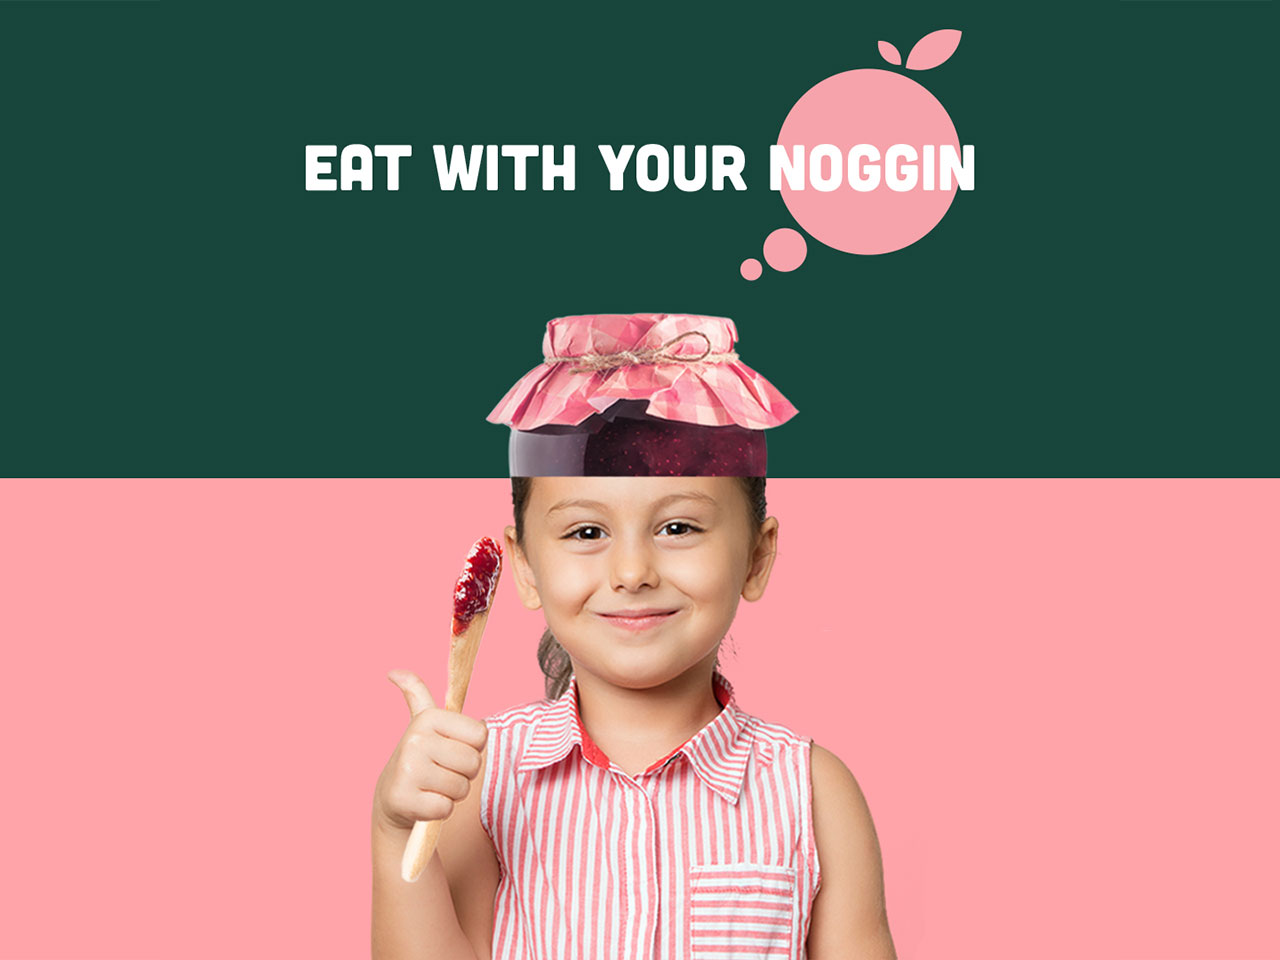 Eat with your noggin